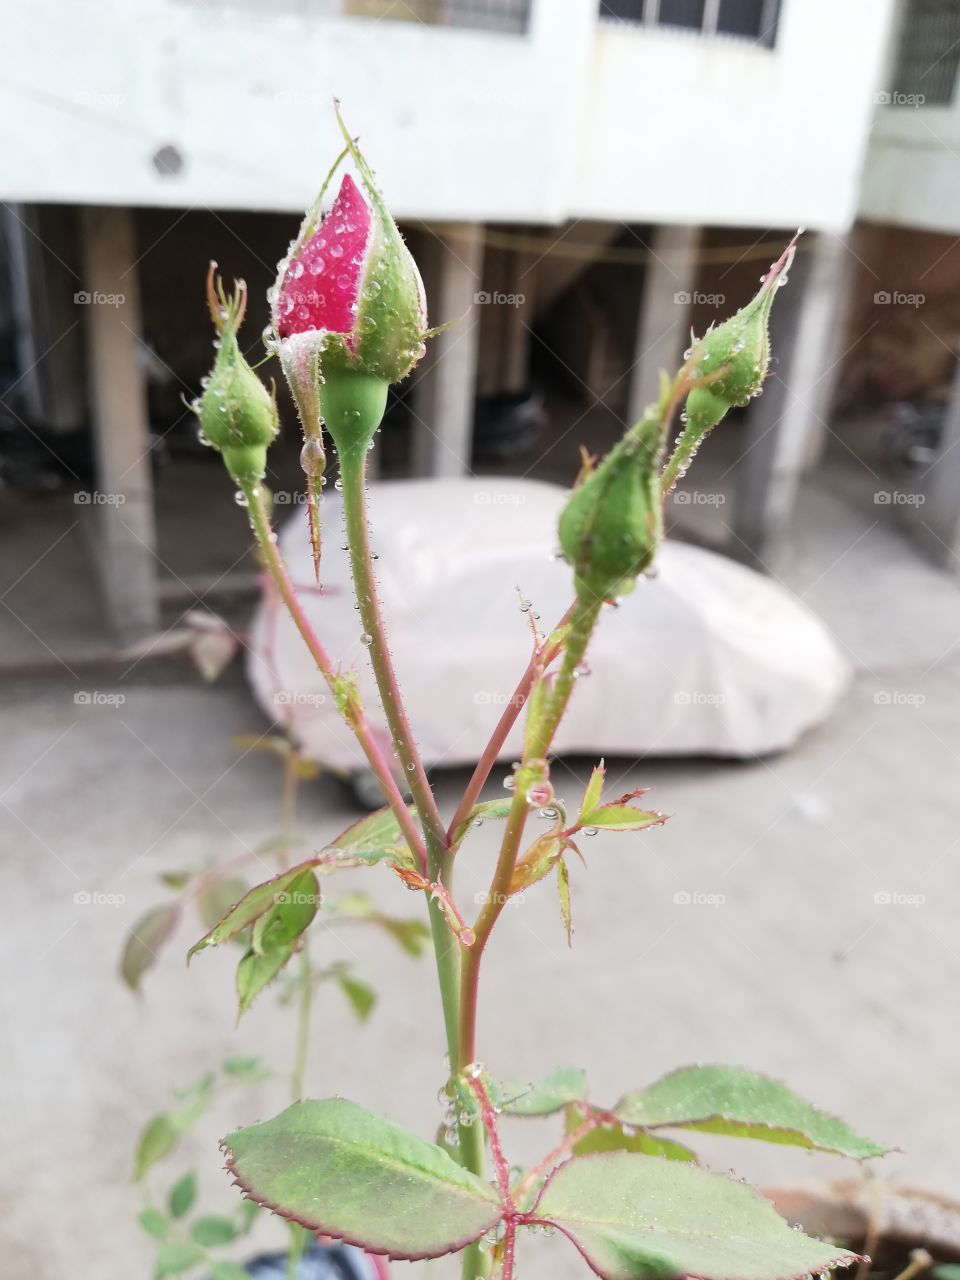 small little kali of rose flowers when first time flowers remove it's branch on flowers